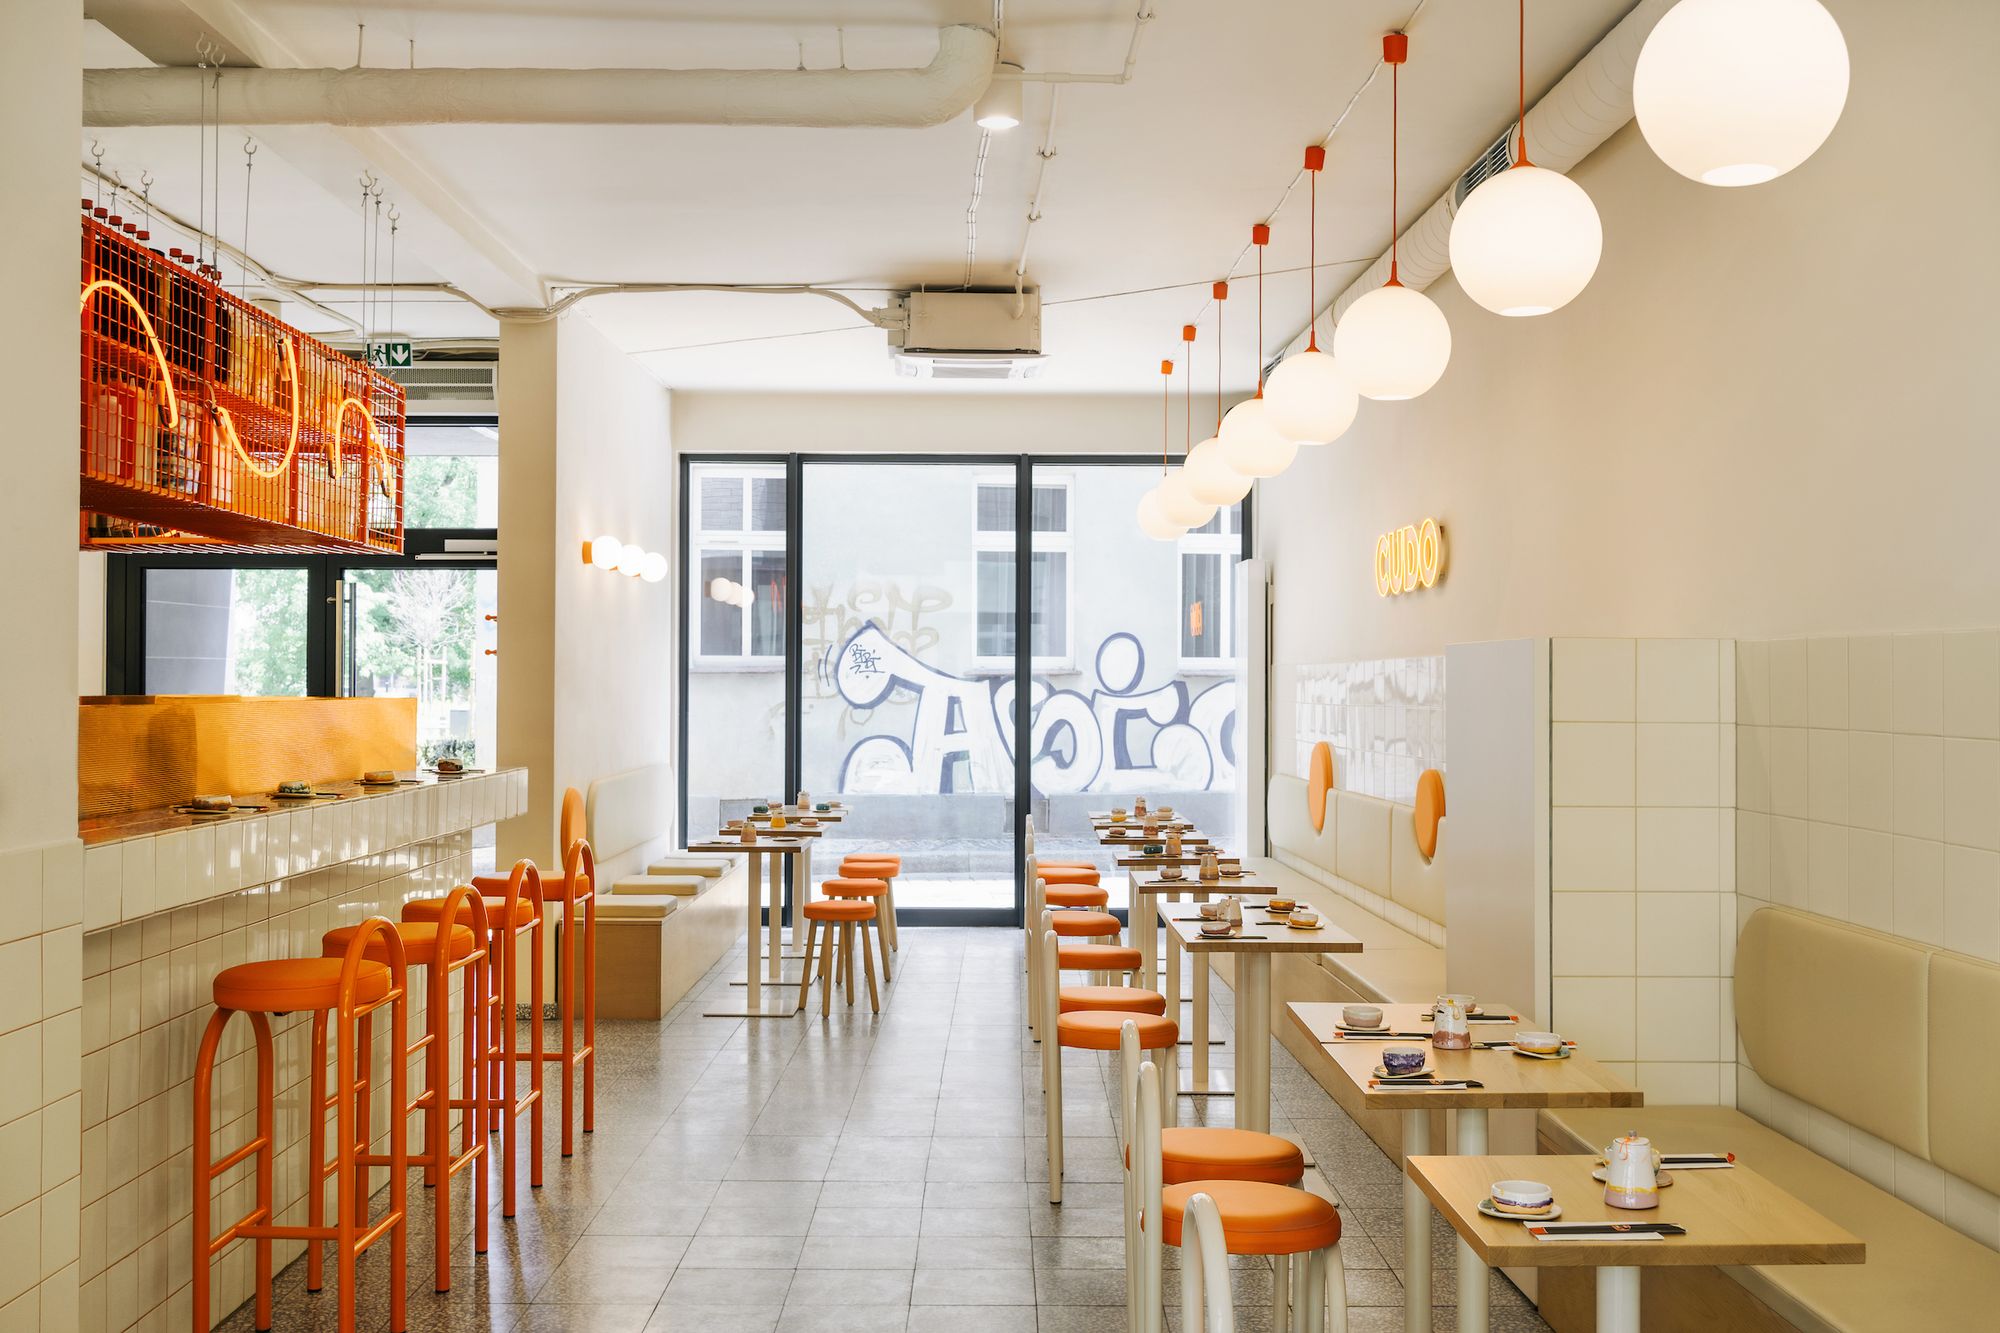 A mixture of Japanese minimalism and street food: introducing CUDO